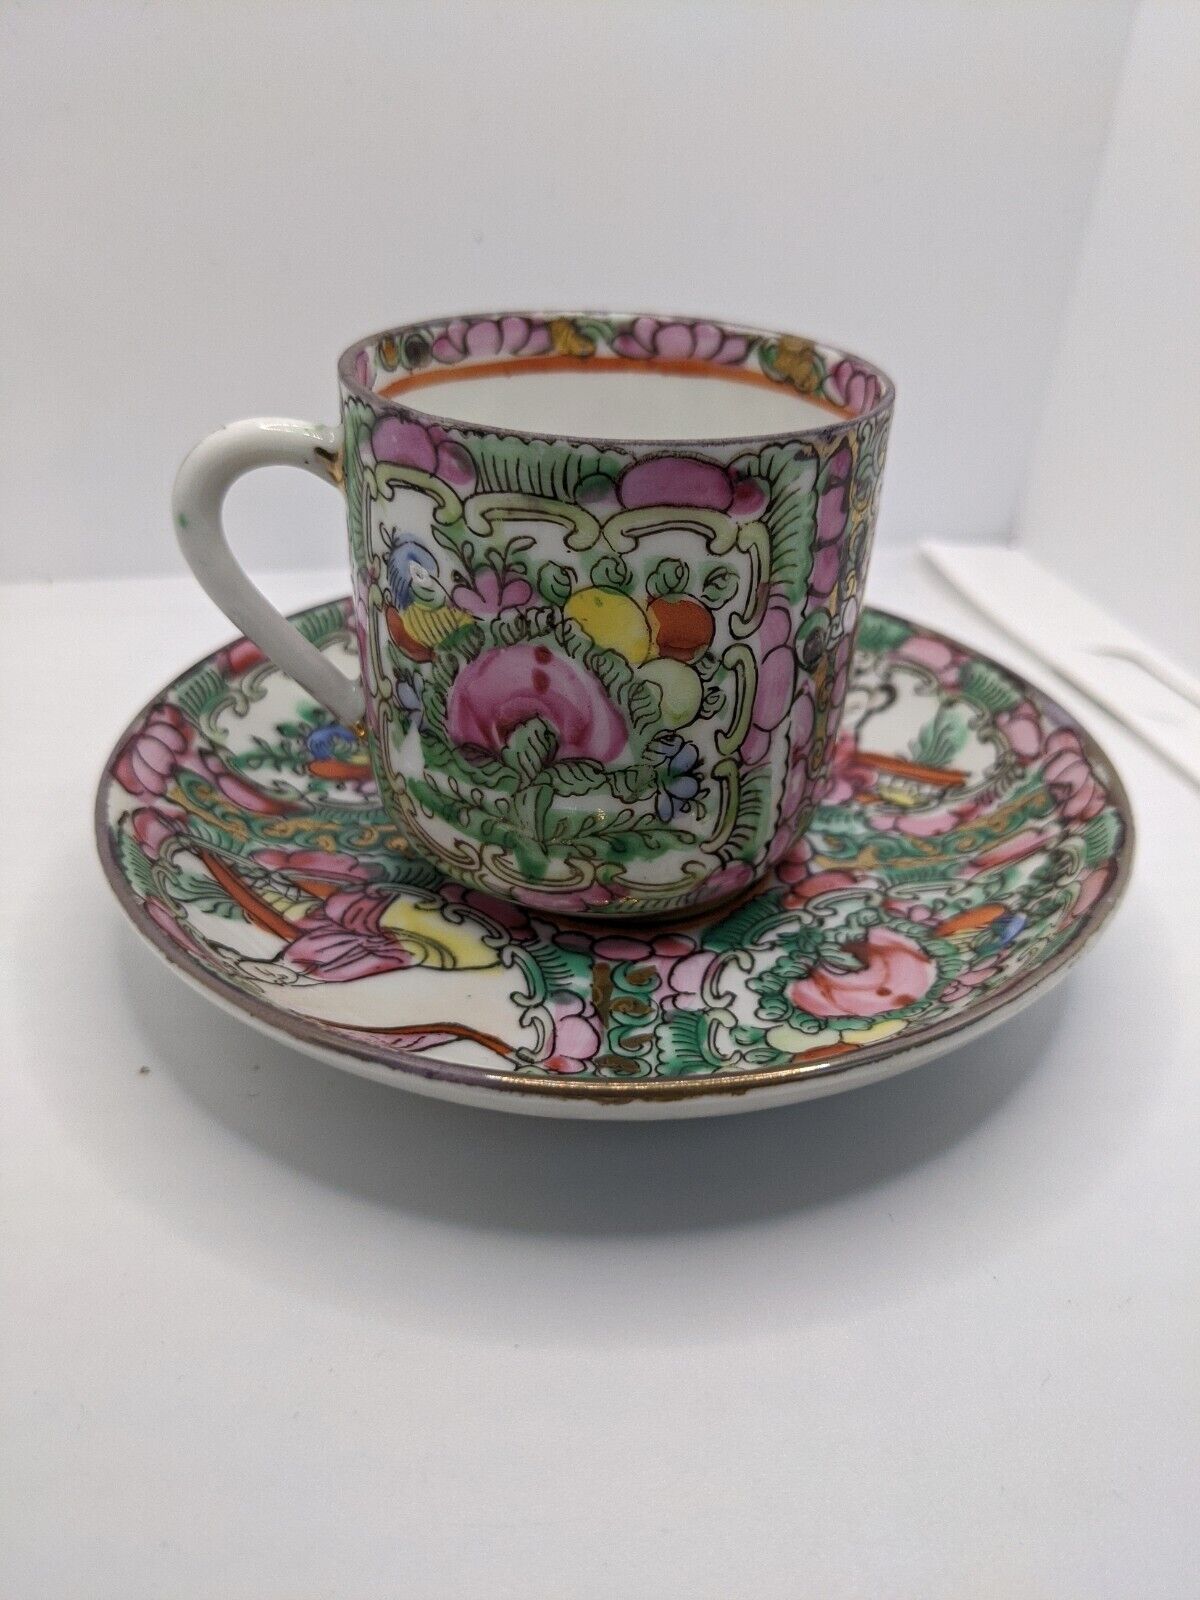 Antique Chinese Porcelain Tea Cup And Saucer Set, Multicolor Scene